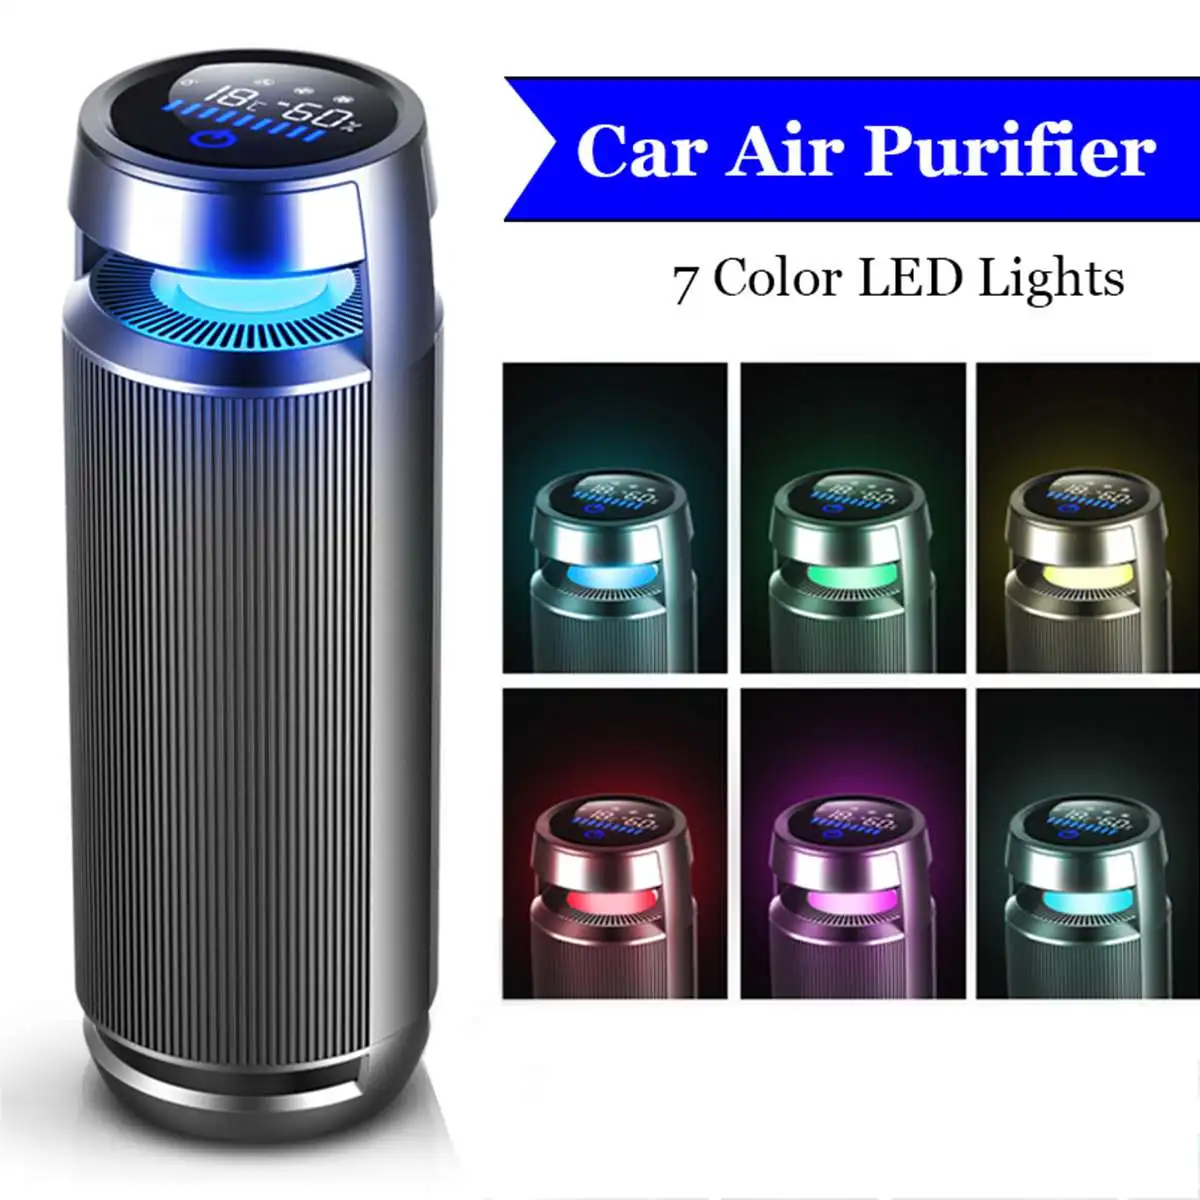 

AUGIENB USB Car Air Purifier Negative Ion Air Cleaner for PM2.5 Formaldehyde Smoke Odor Allergies LED Light Fast Frash Air